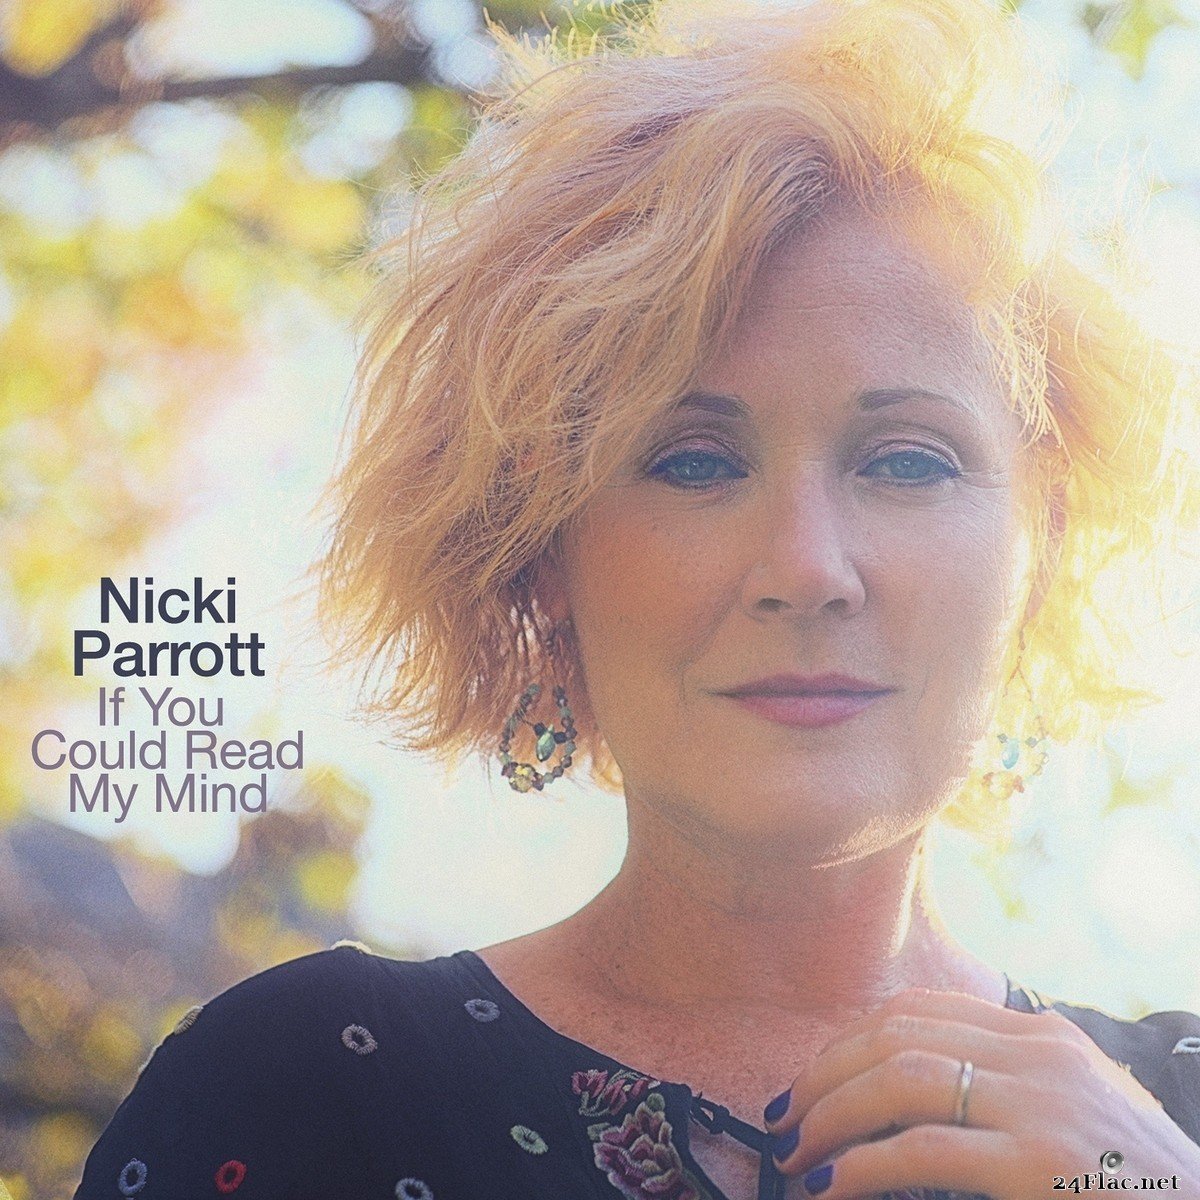 Nicki Parrott - If You Could Read My Mind (2021) FLAC + Hi-Res